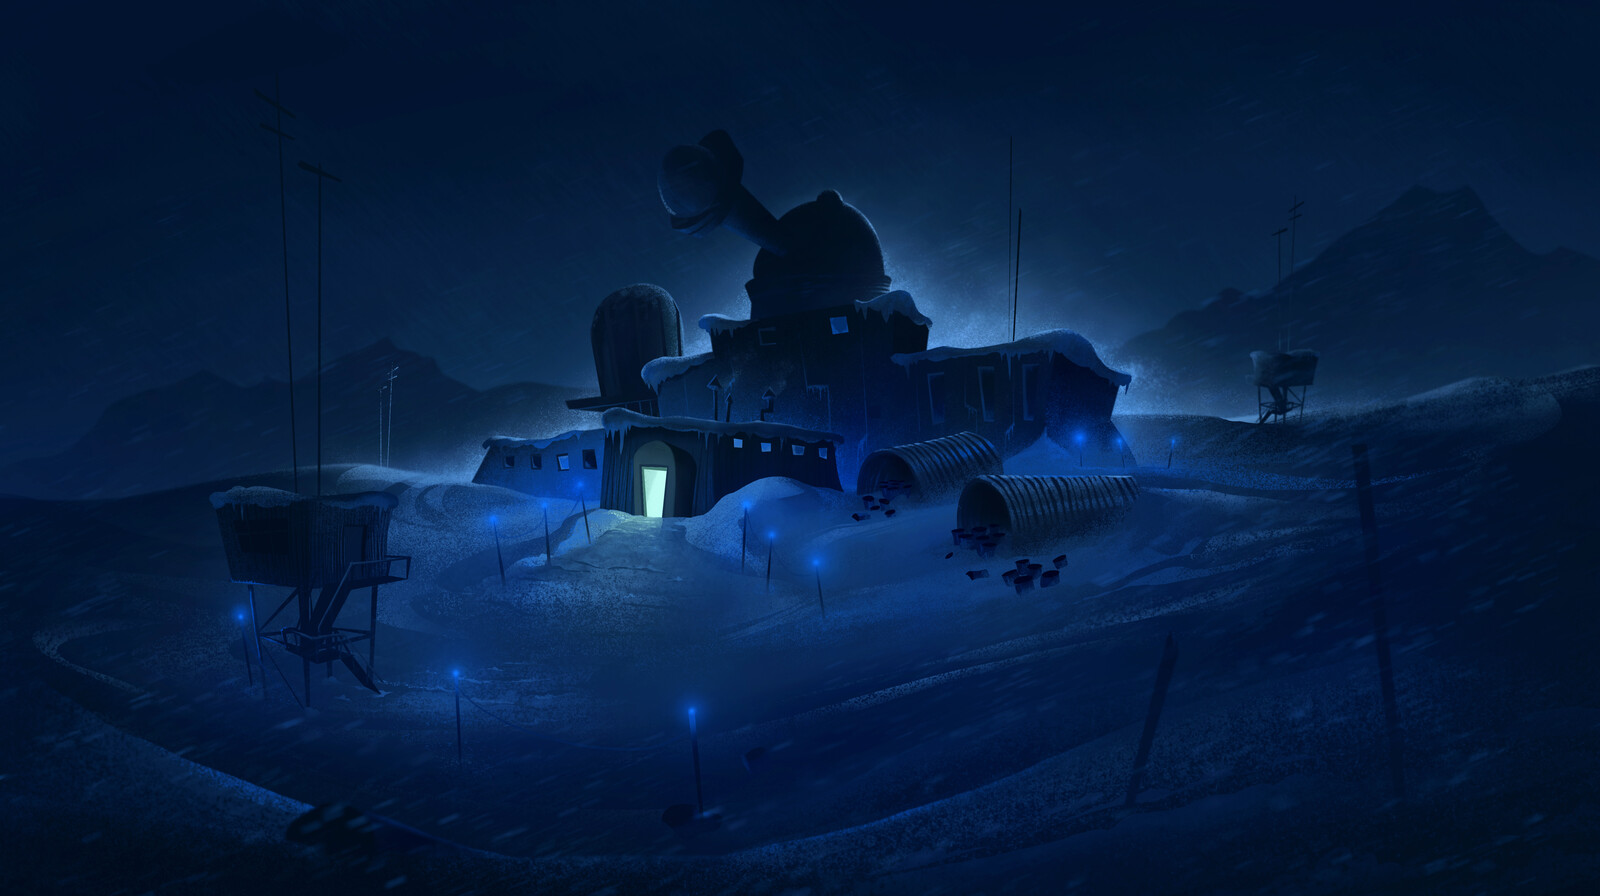 Arctic Research Base